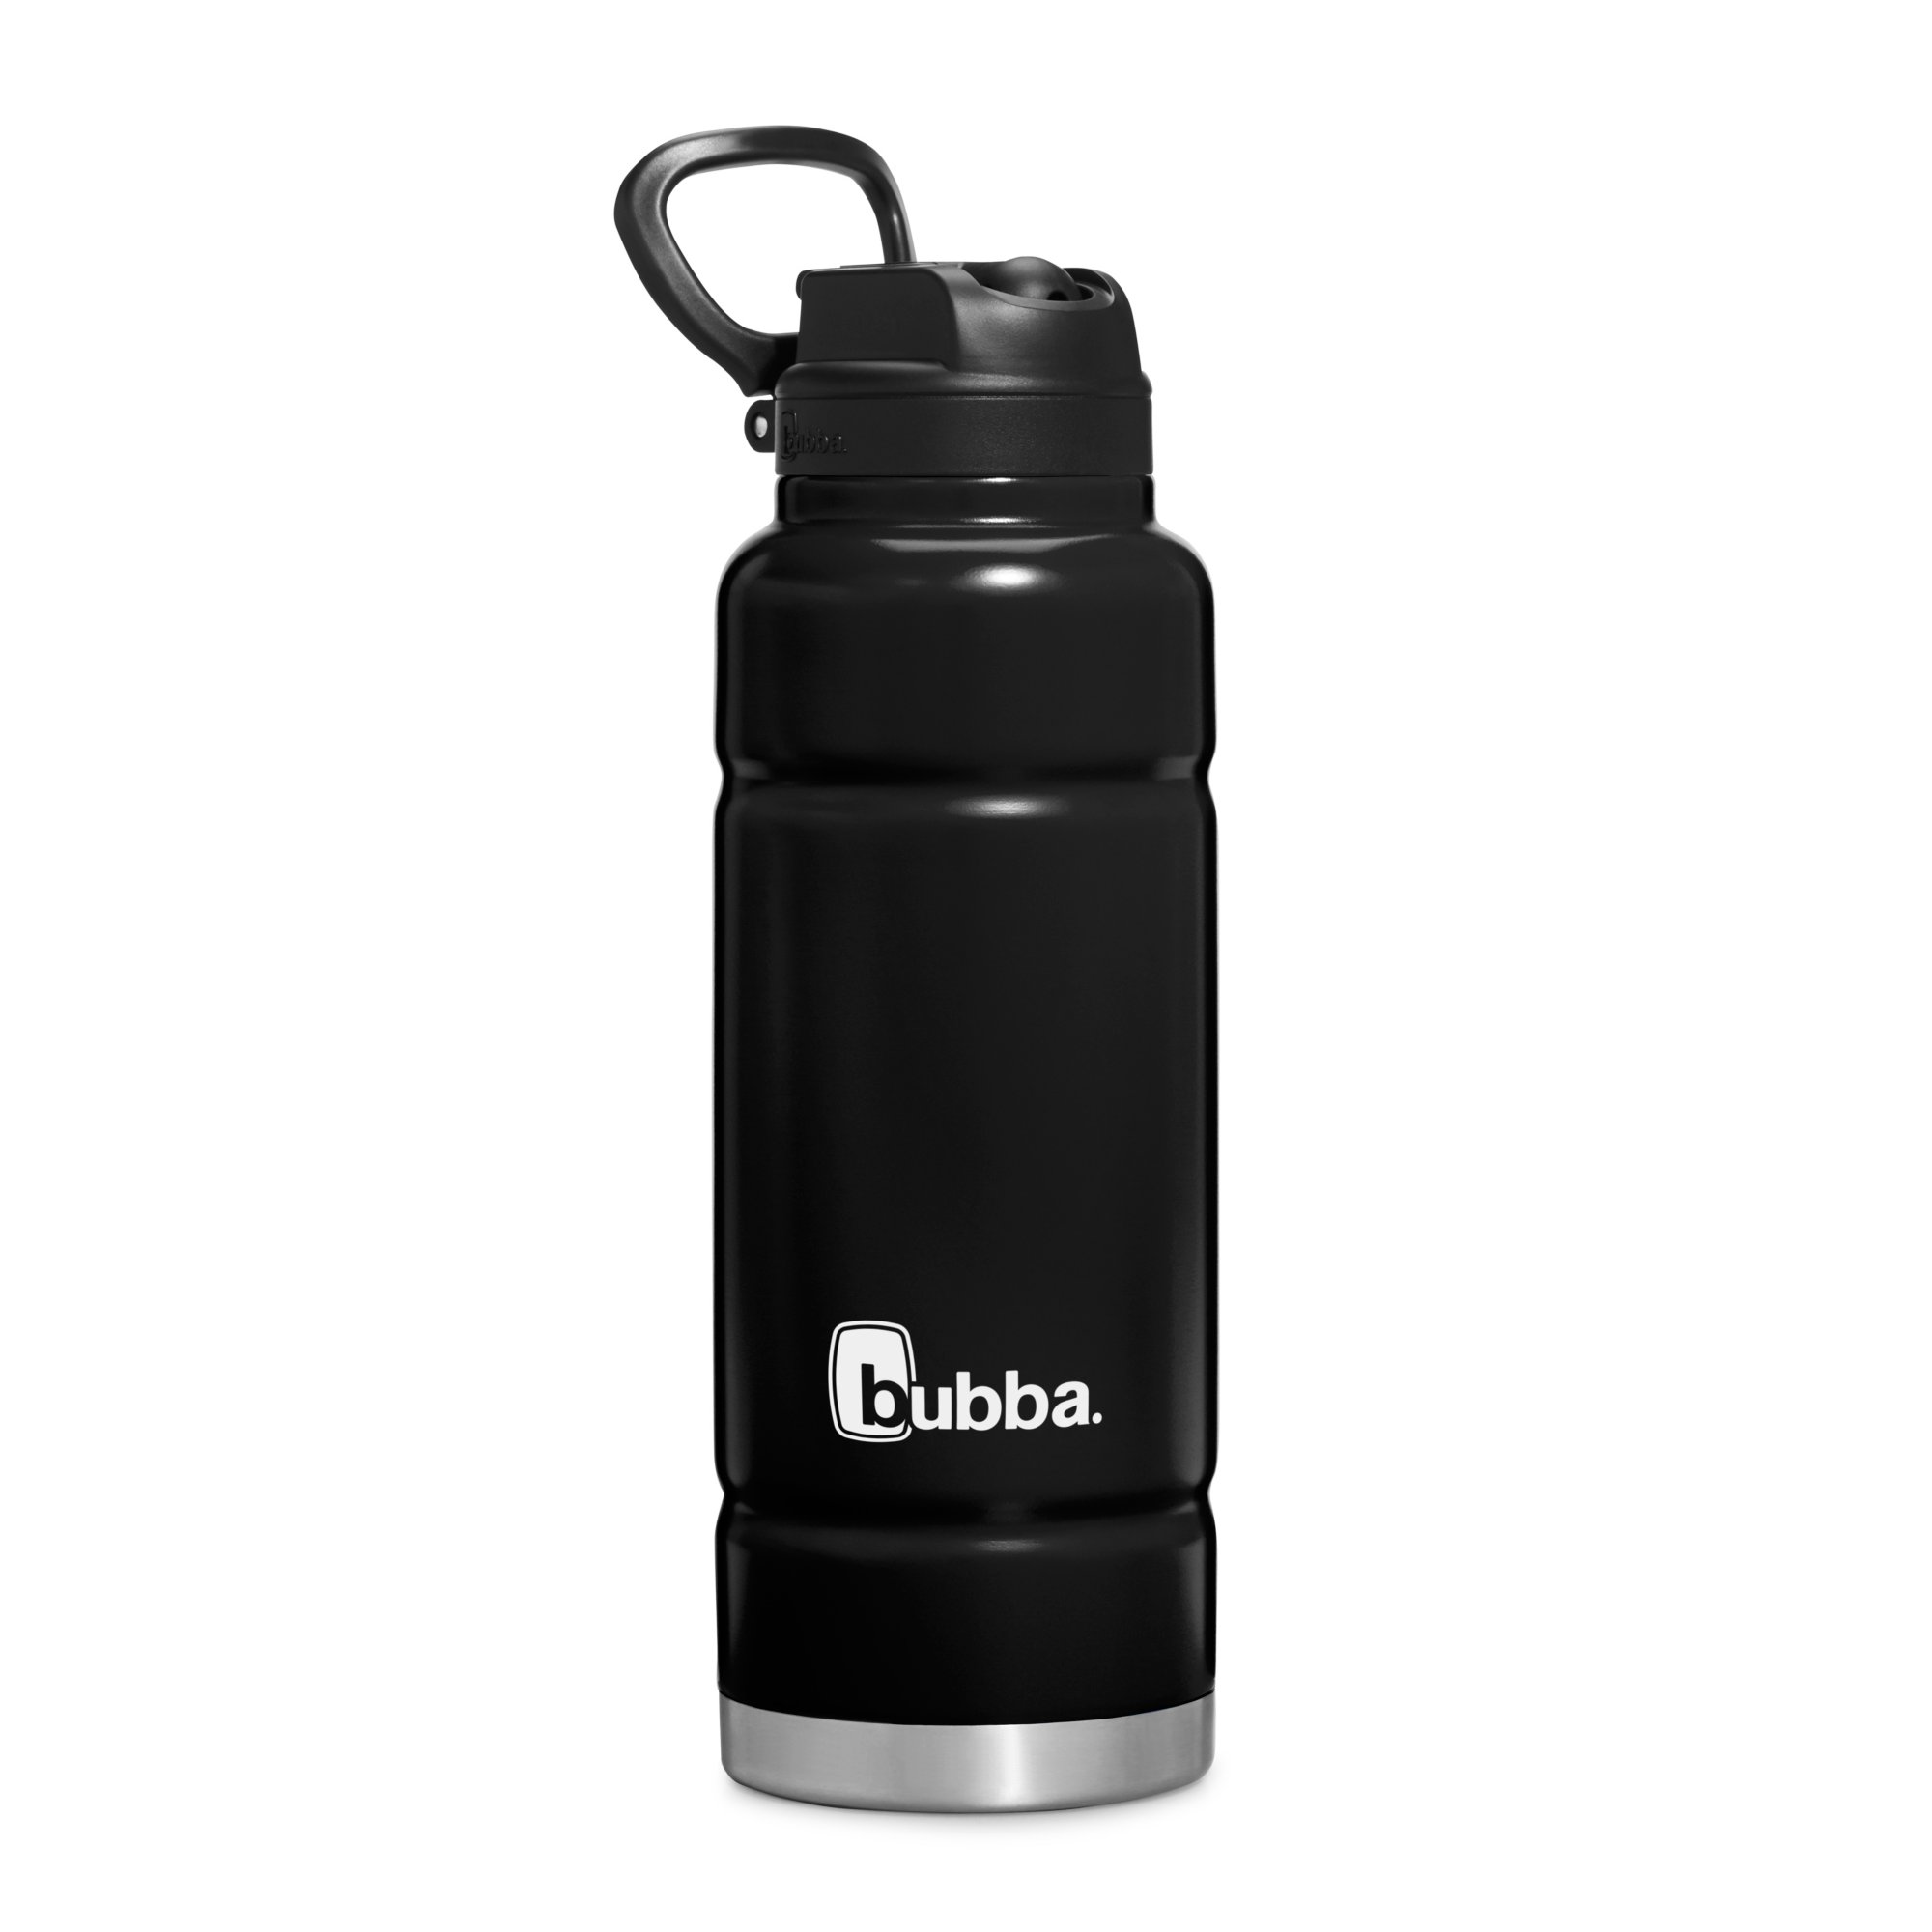 Bubba 24 oz. Tutti Fruity Blue and Licorice Stainless Steel